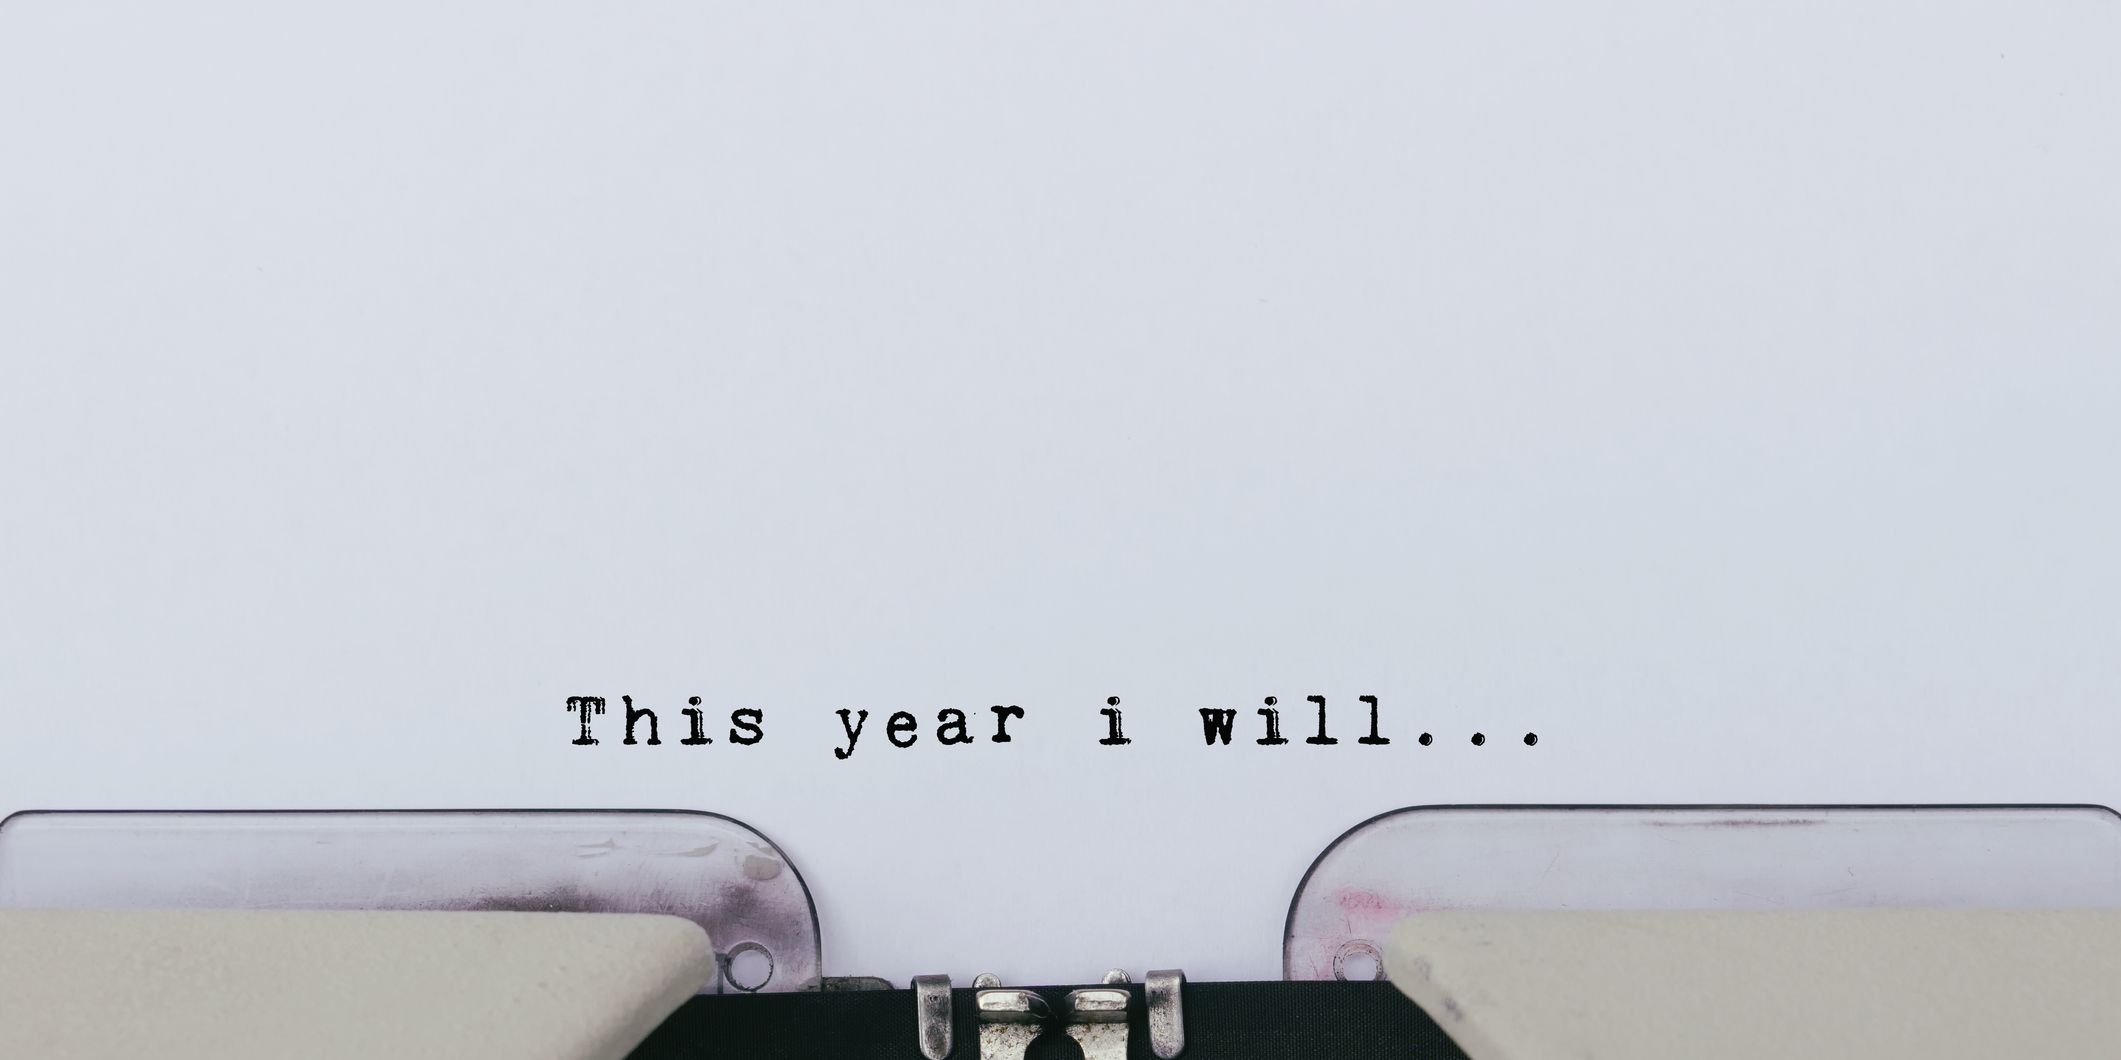 new year resolution quotes